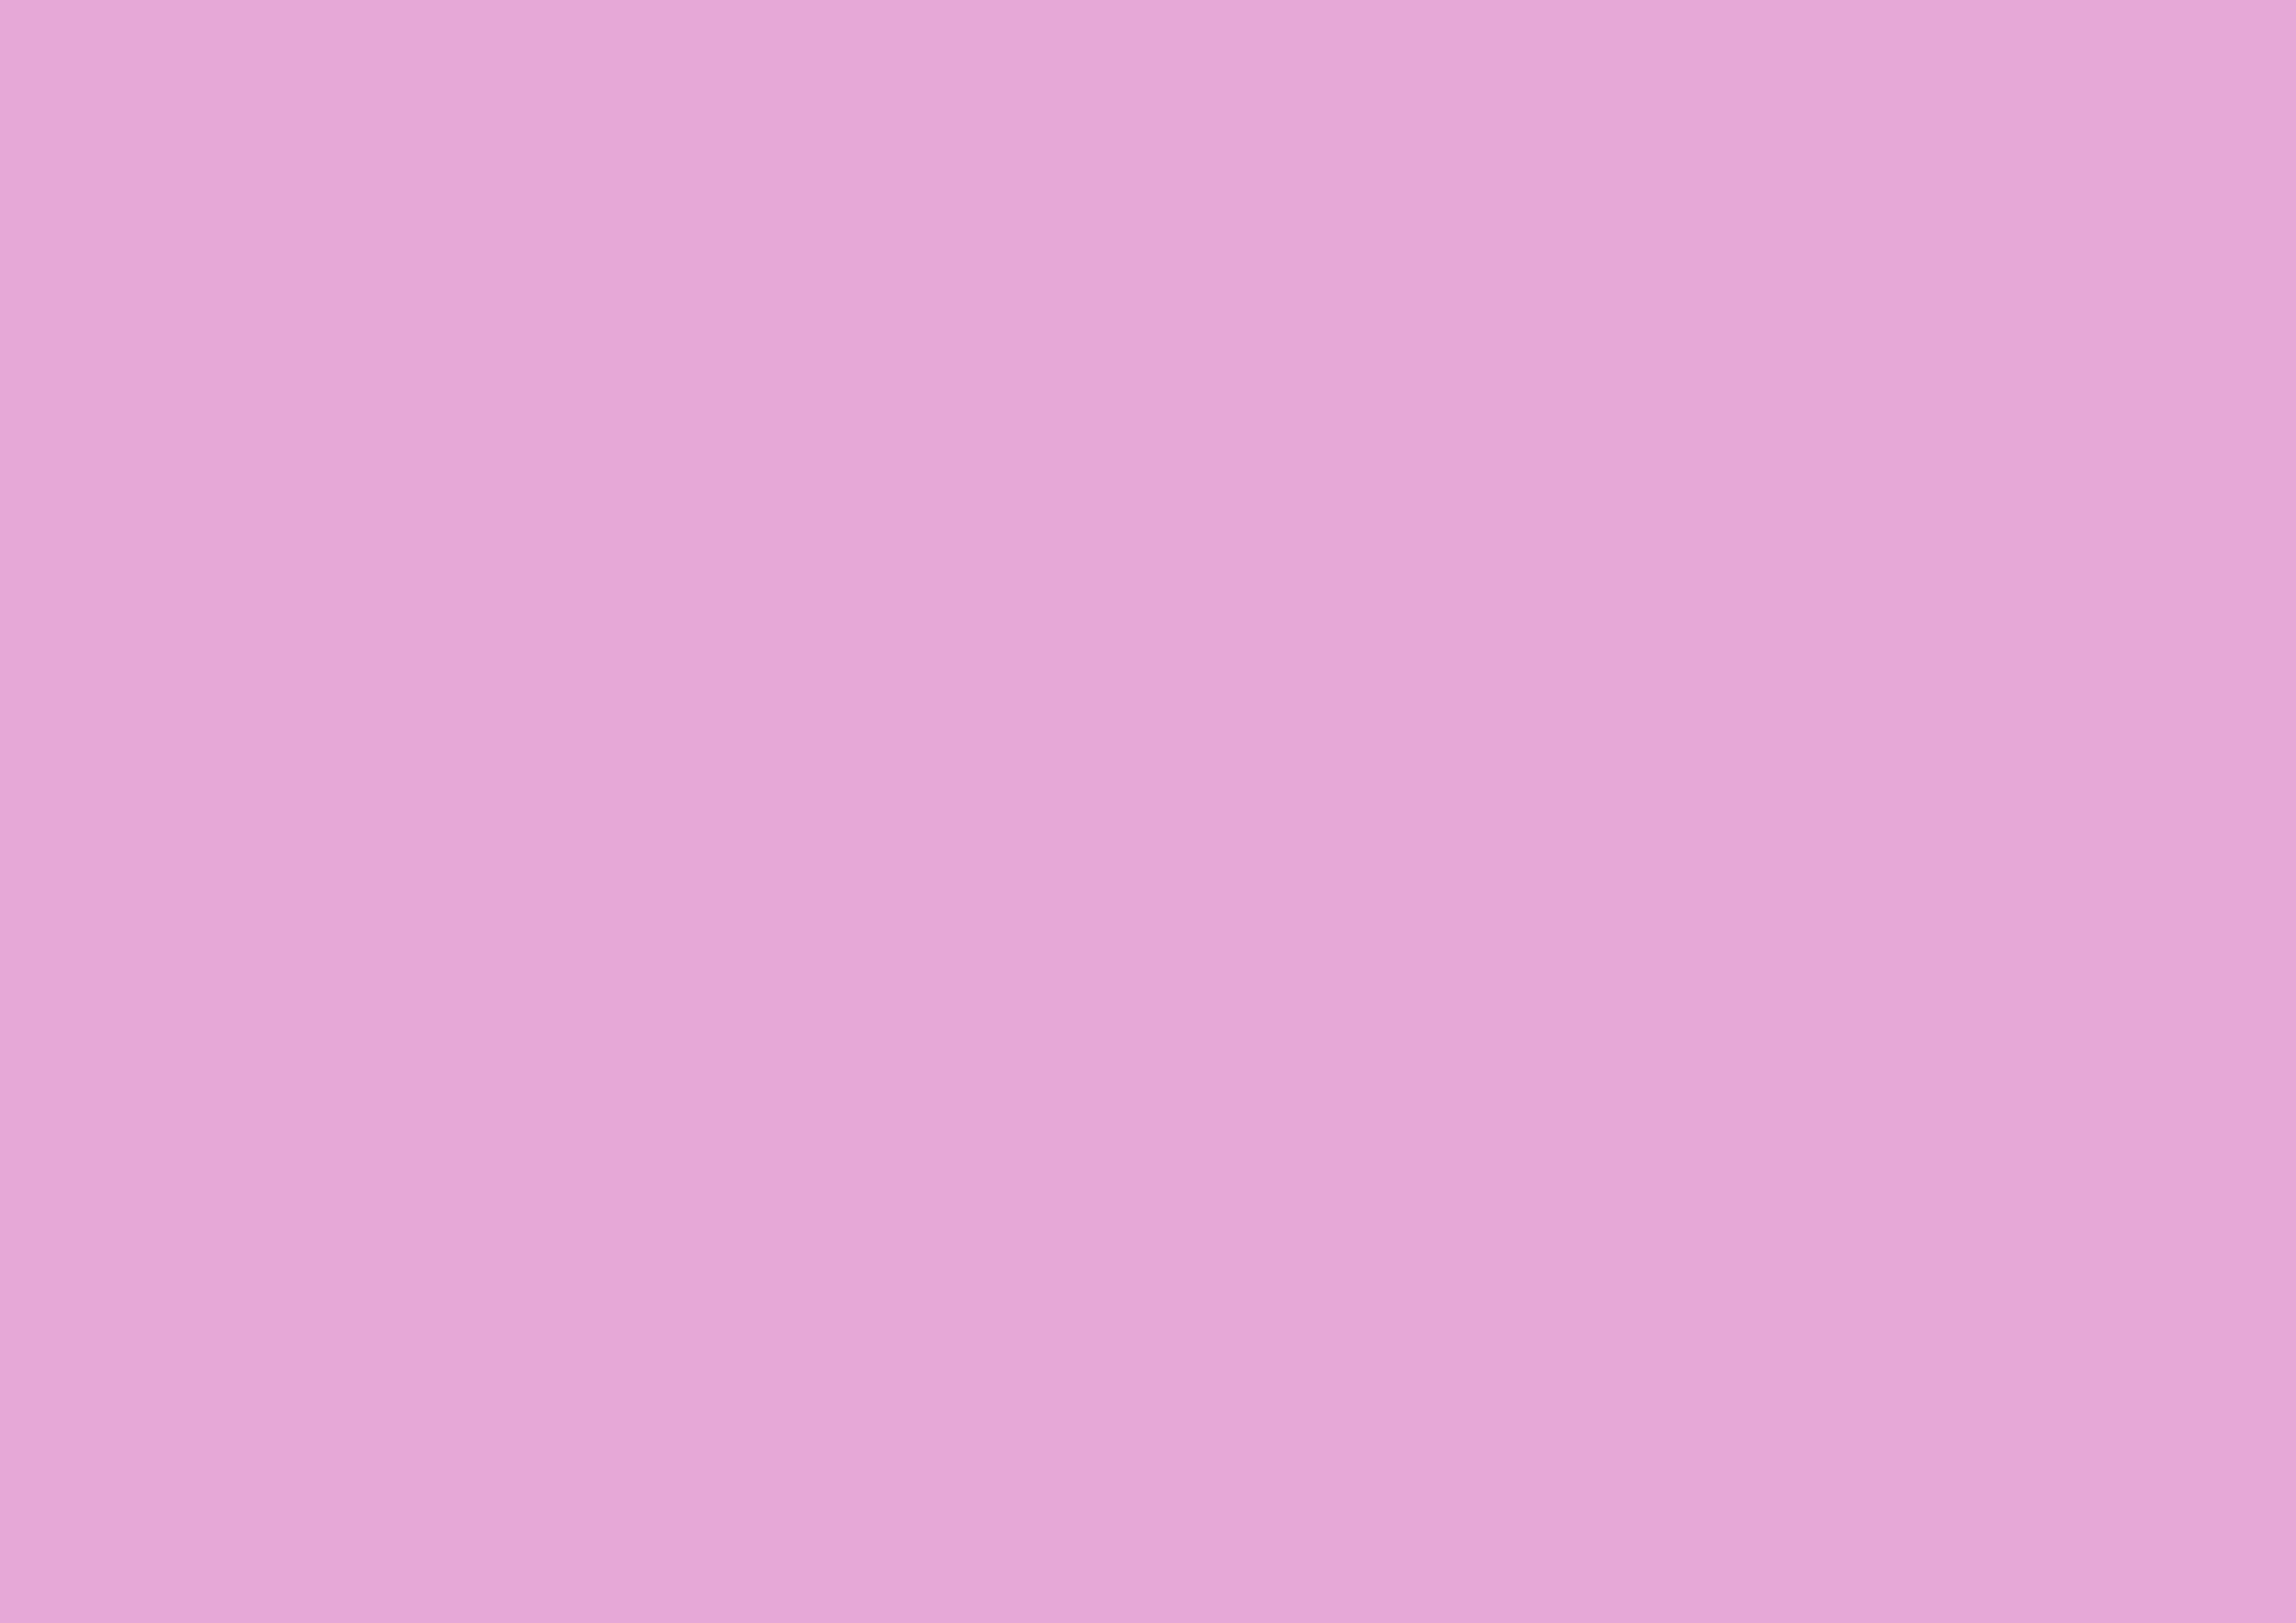 3508x2480 Light Orchid Solid Color Background